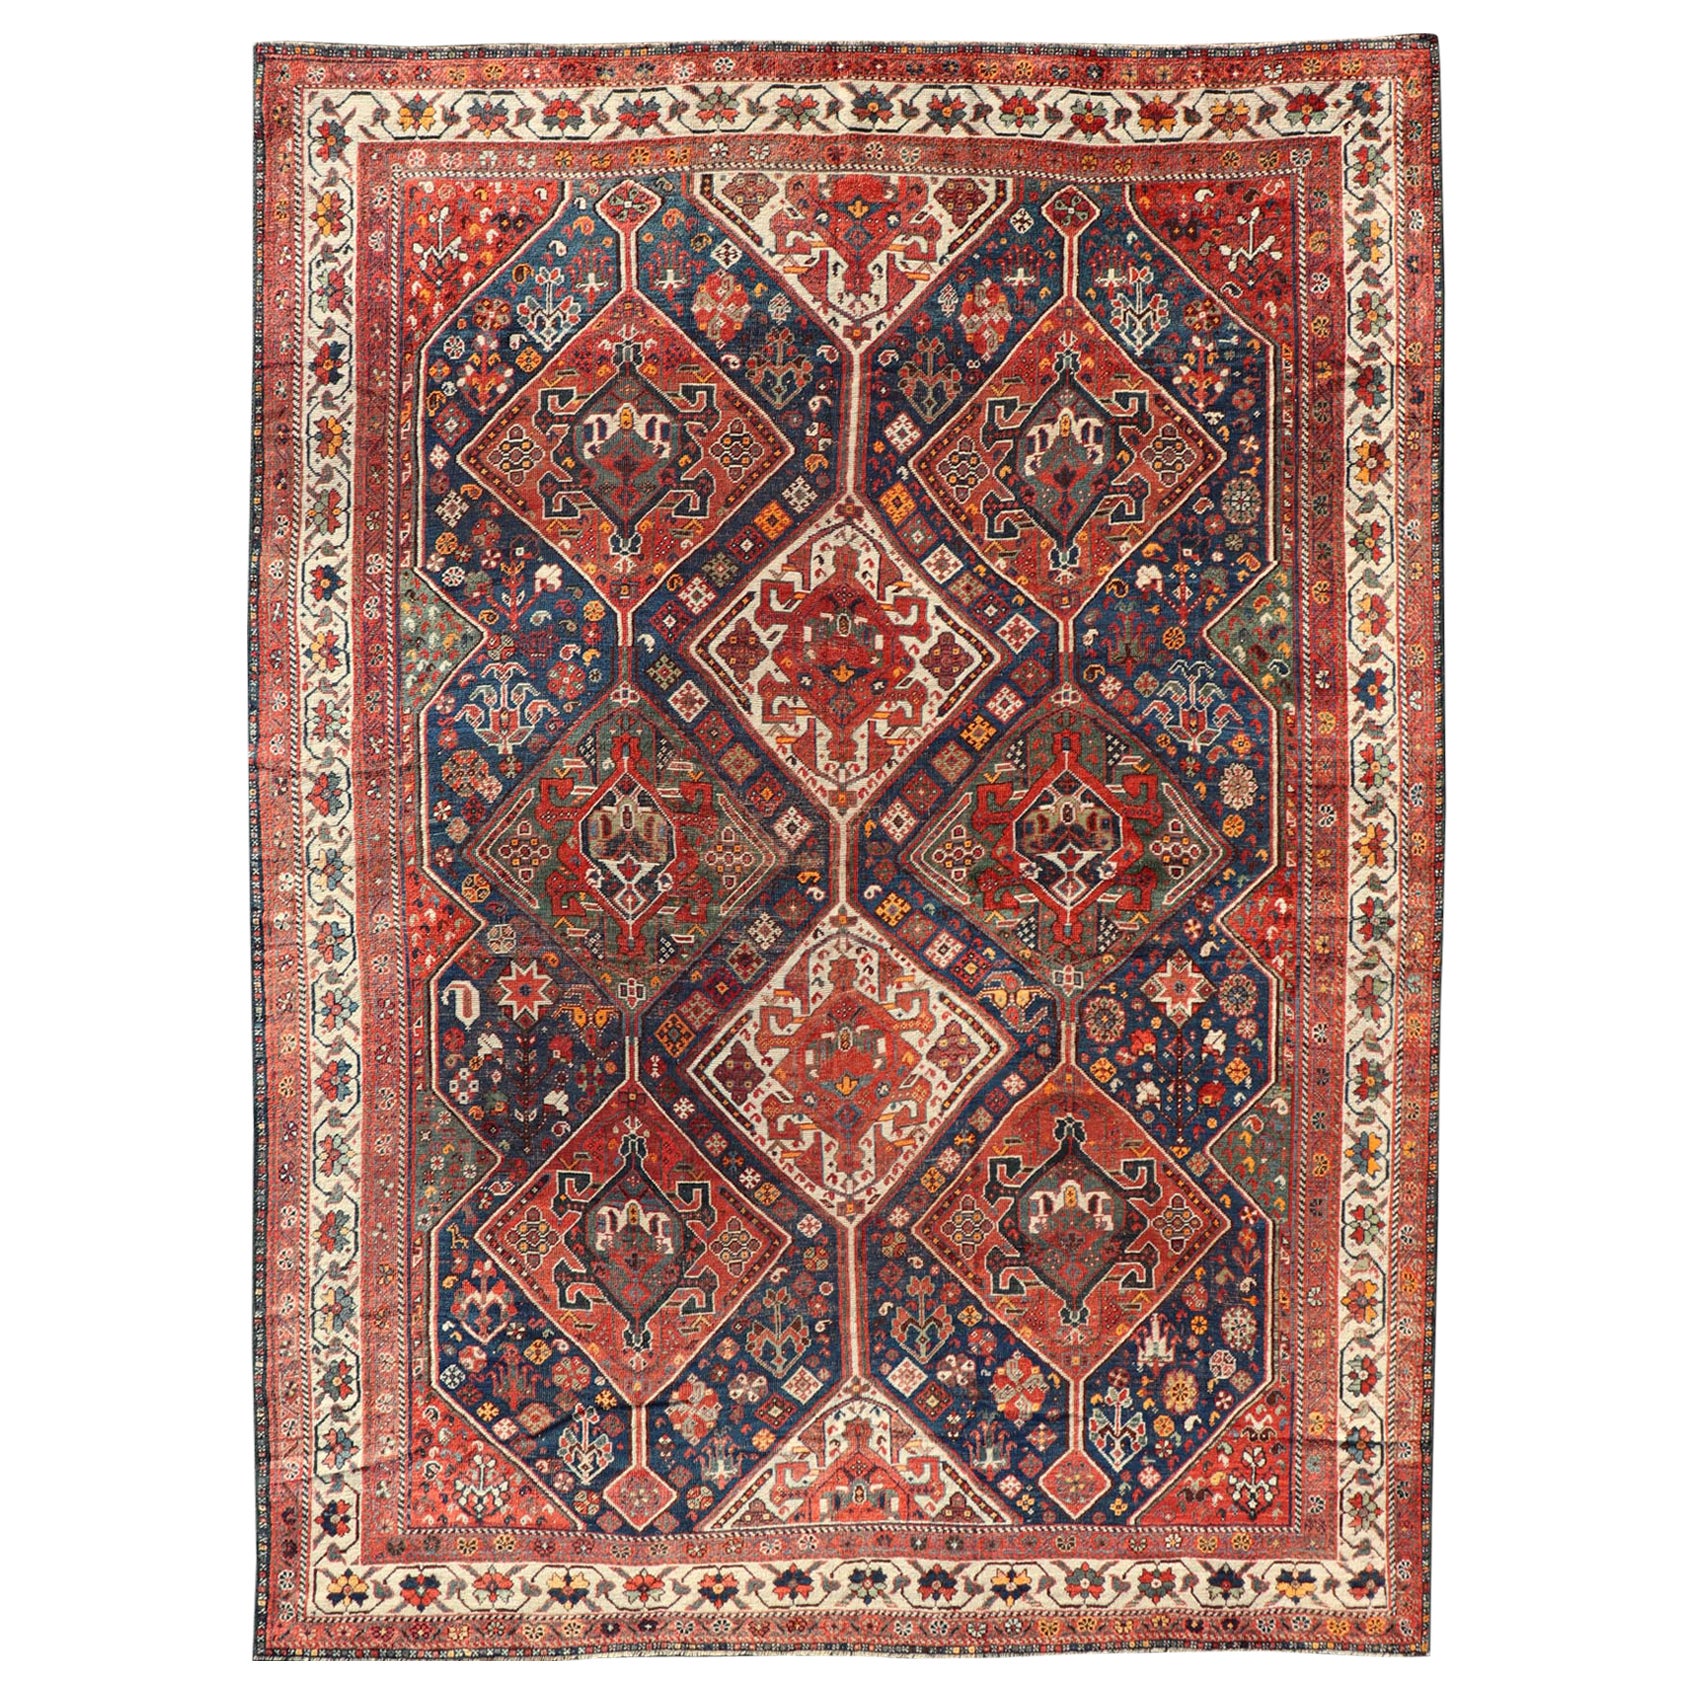 Antique Persian Shiraz Rug with Diamond Medallions in Navy Blue, Red & Ivory For Sale